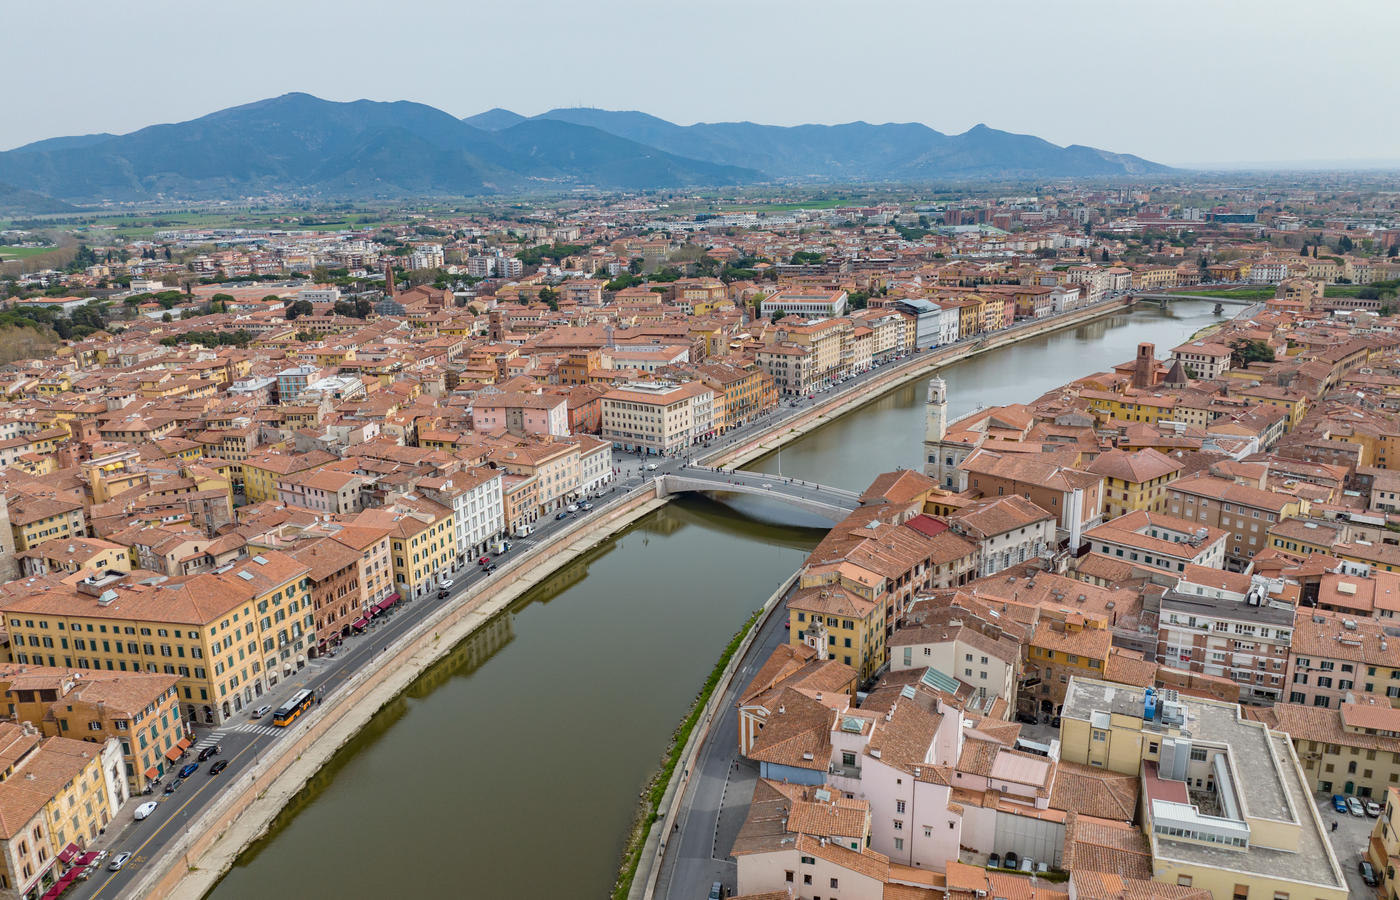 Pisa: More than just a leaning tower